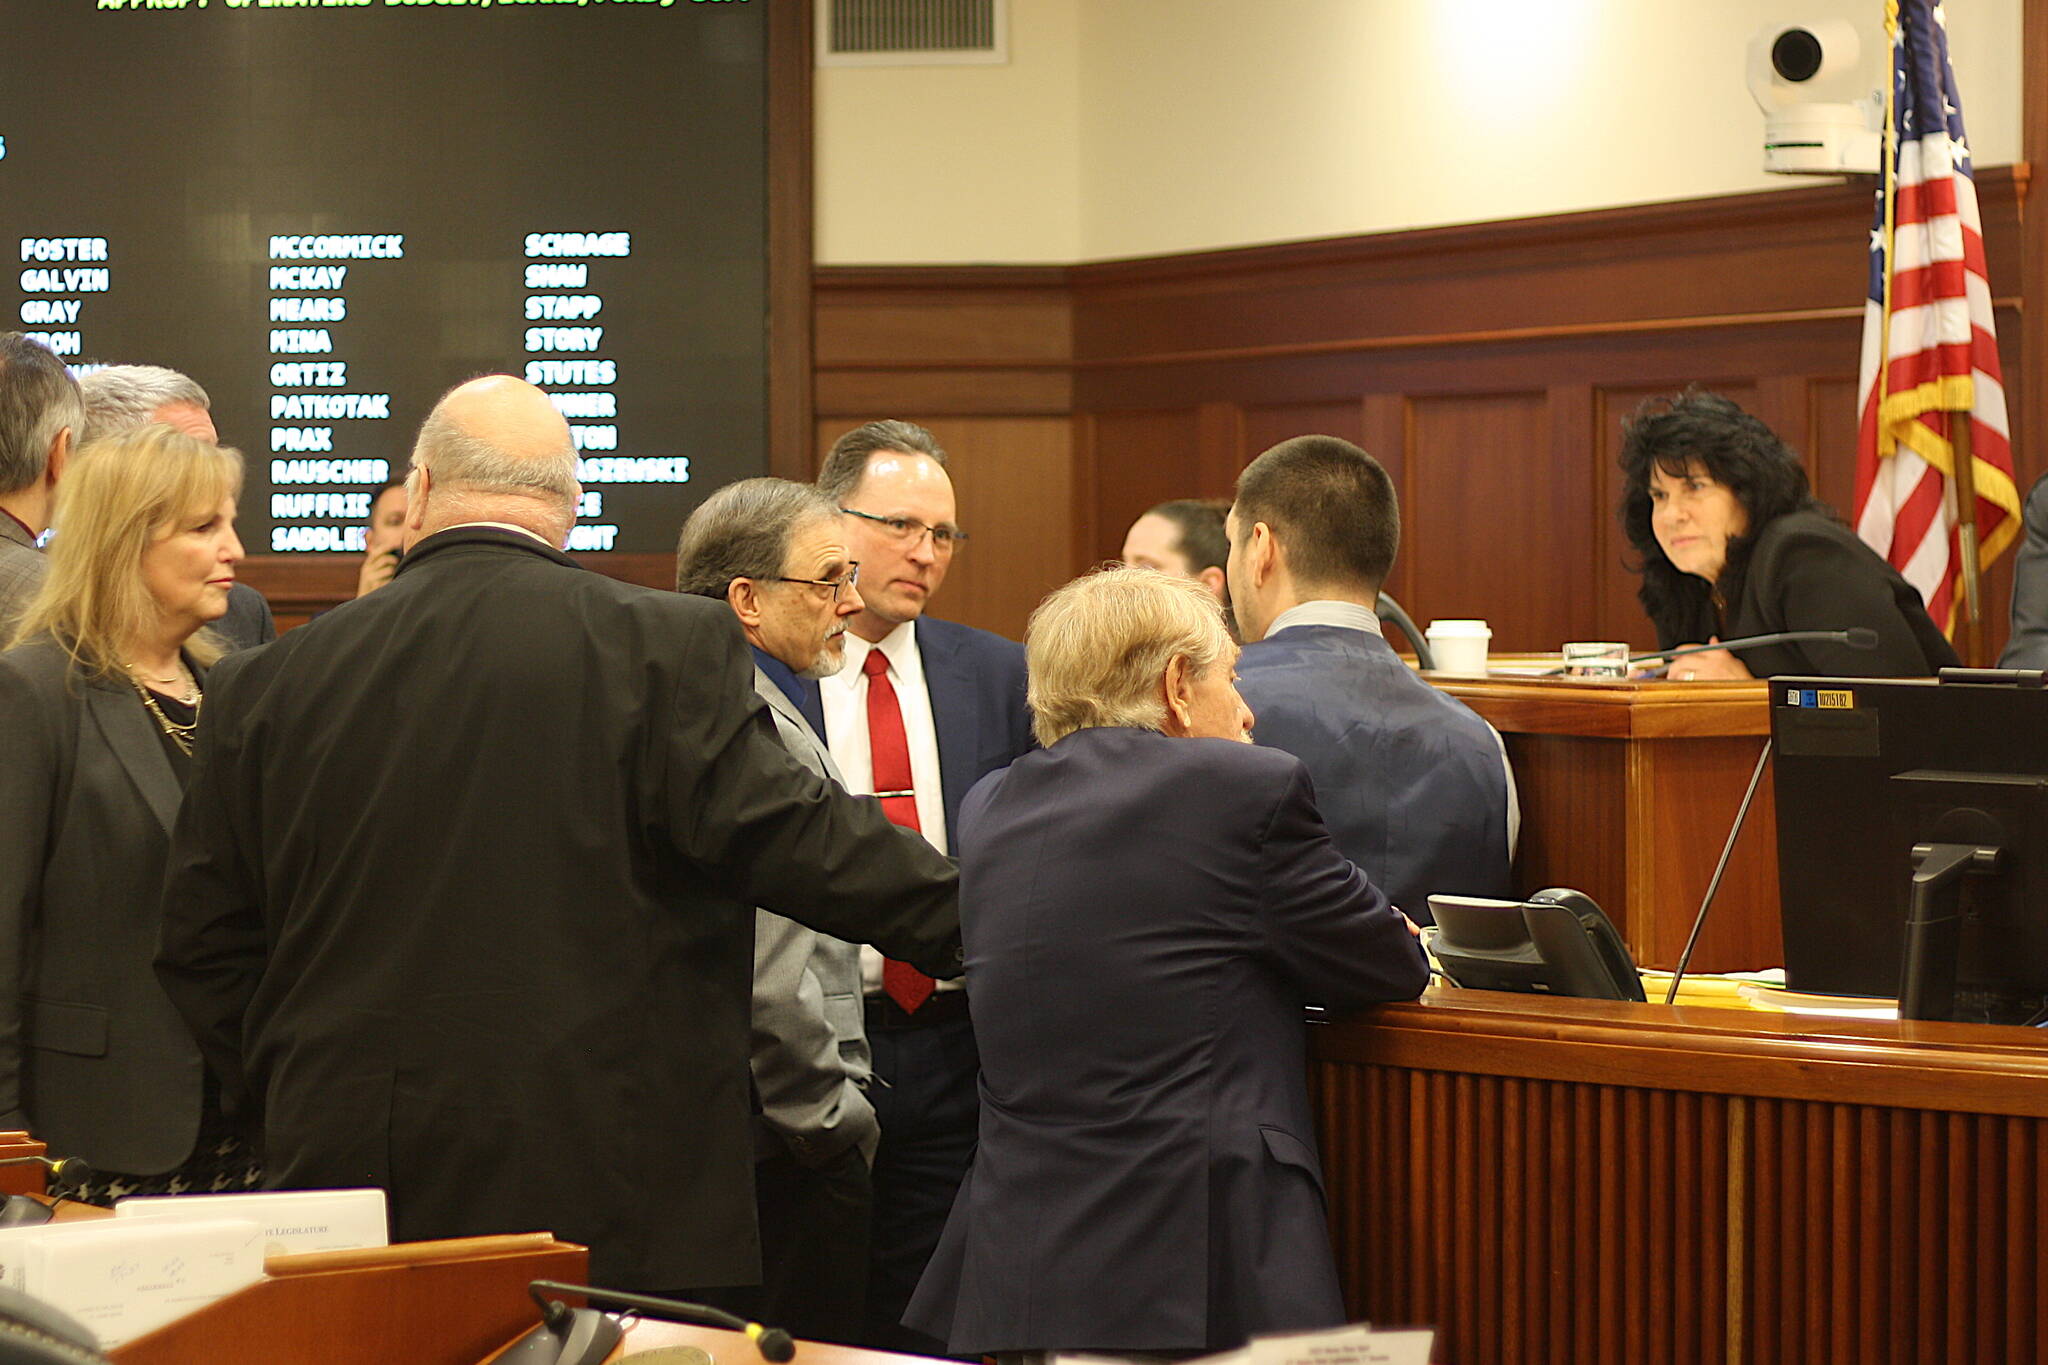 Alaska House Speaker Cathy Tilton, R-Wasilla, right, confers with other House members during a break in the floor debate last Wednesday about next year’s proposed budget. She said the original plan of passing a budget last week has shifted due to discussions with the Senate about resolving differences in their spending plans, with a floor vote now planned by early next week.